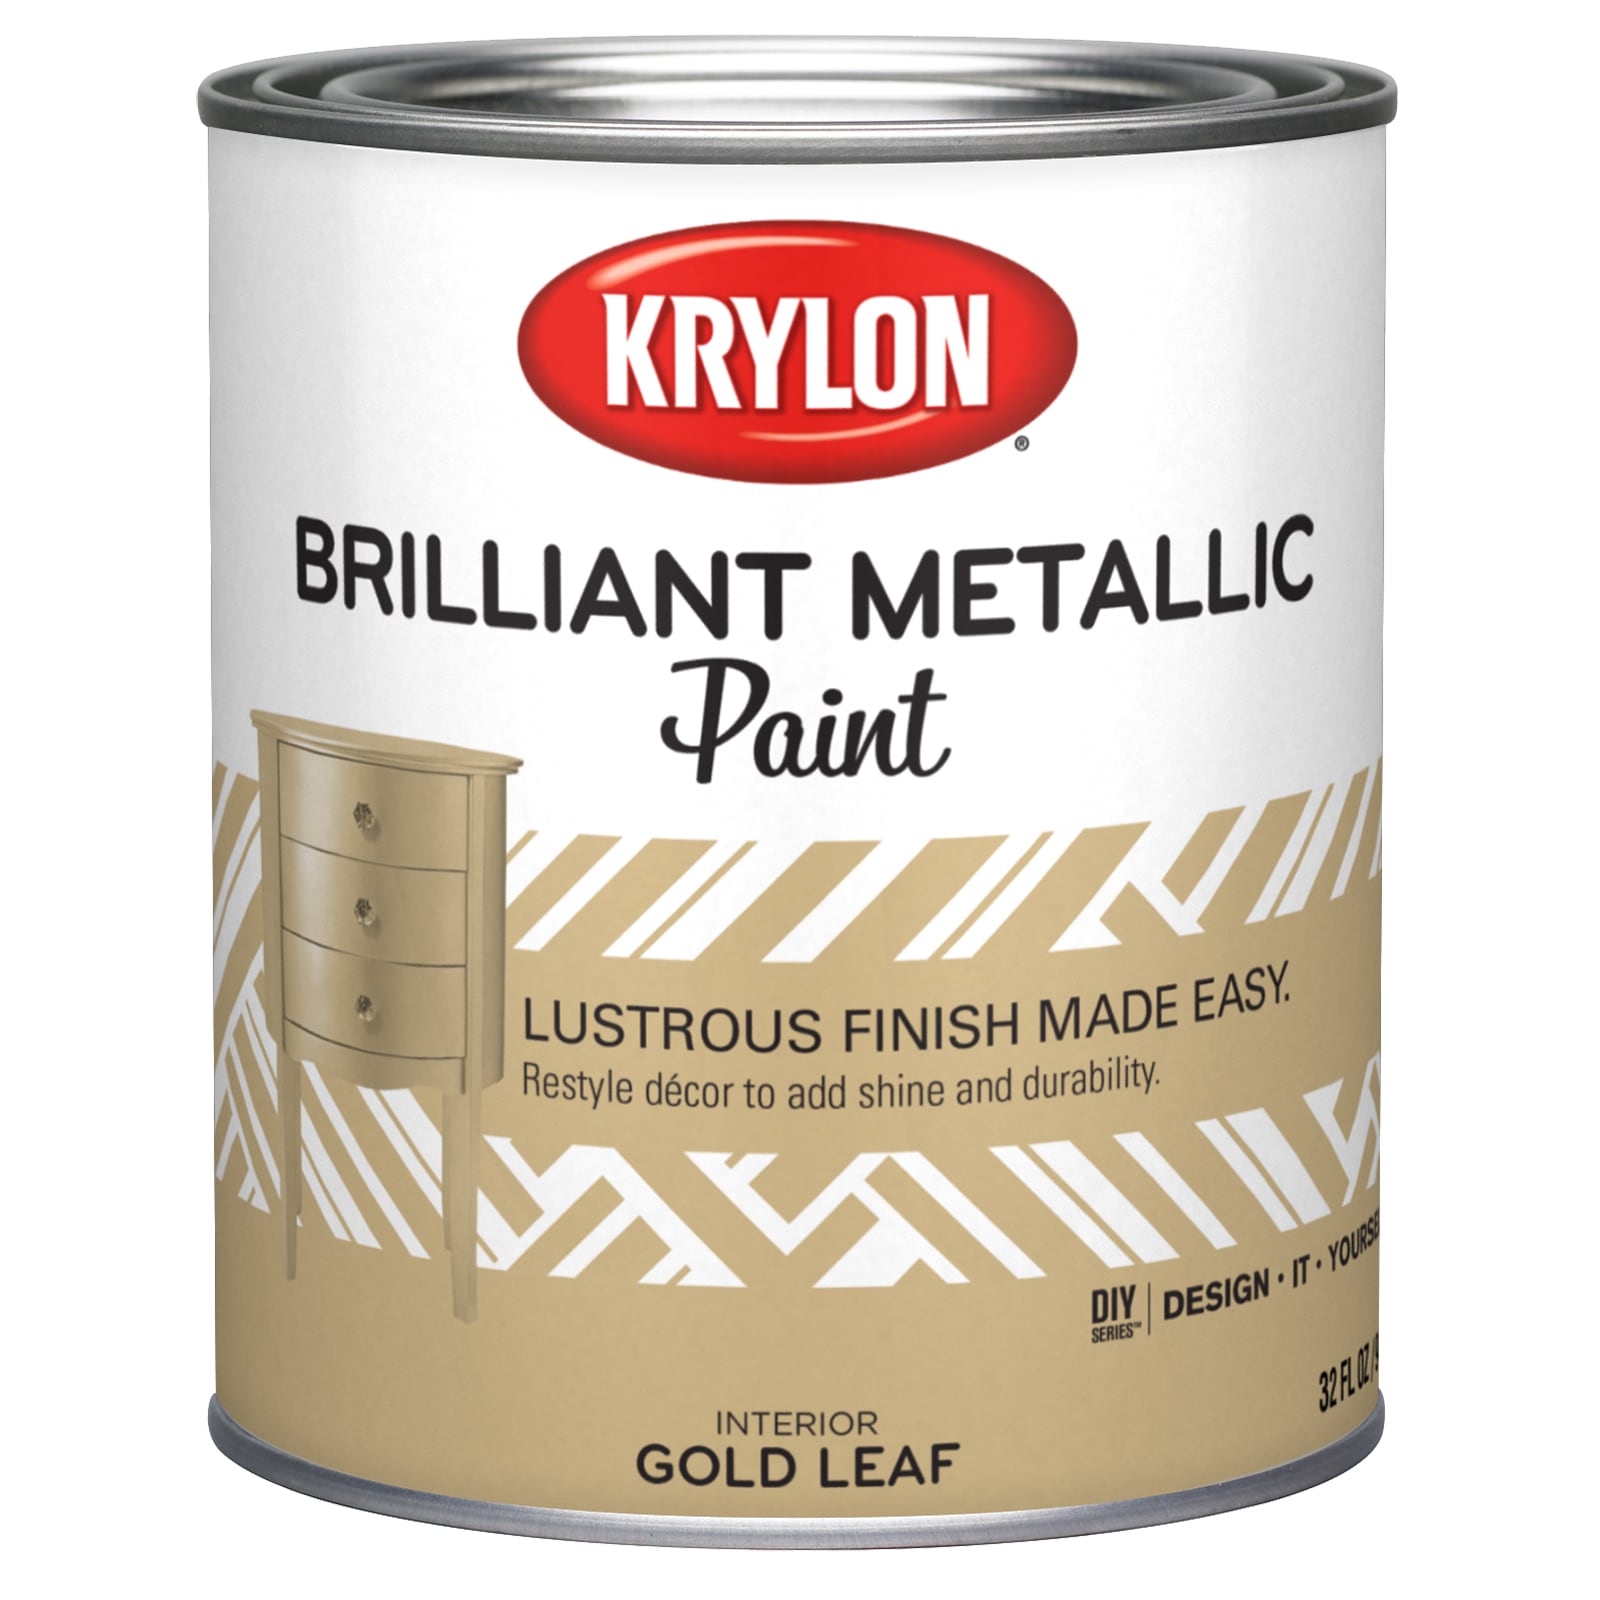 Metallic Paint, Water Based Acrylic in Gold Silver Copper Blue Green Red,  30ml 1 Oz Bottle -  Israel